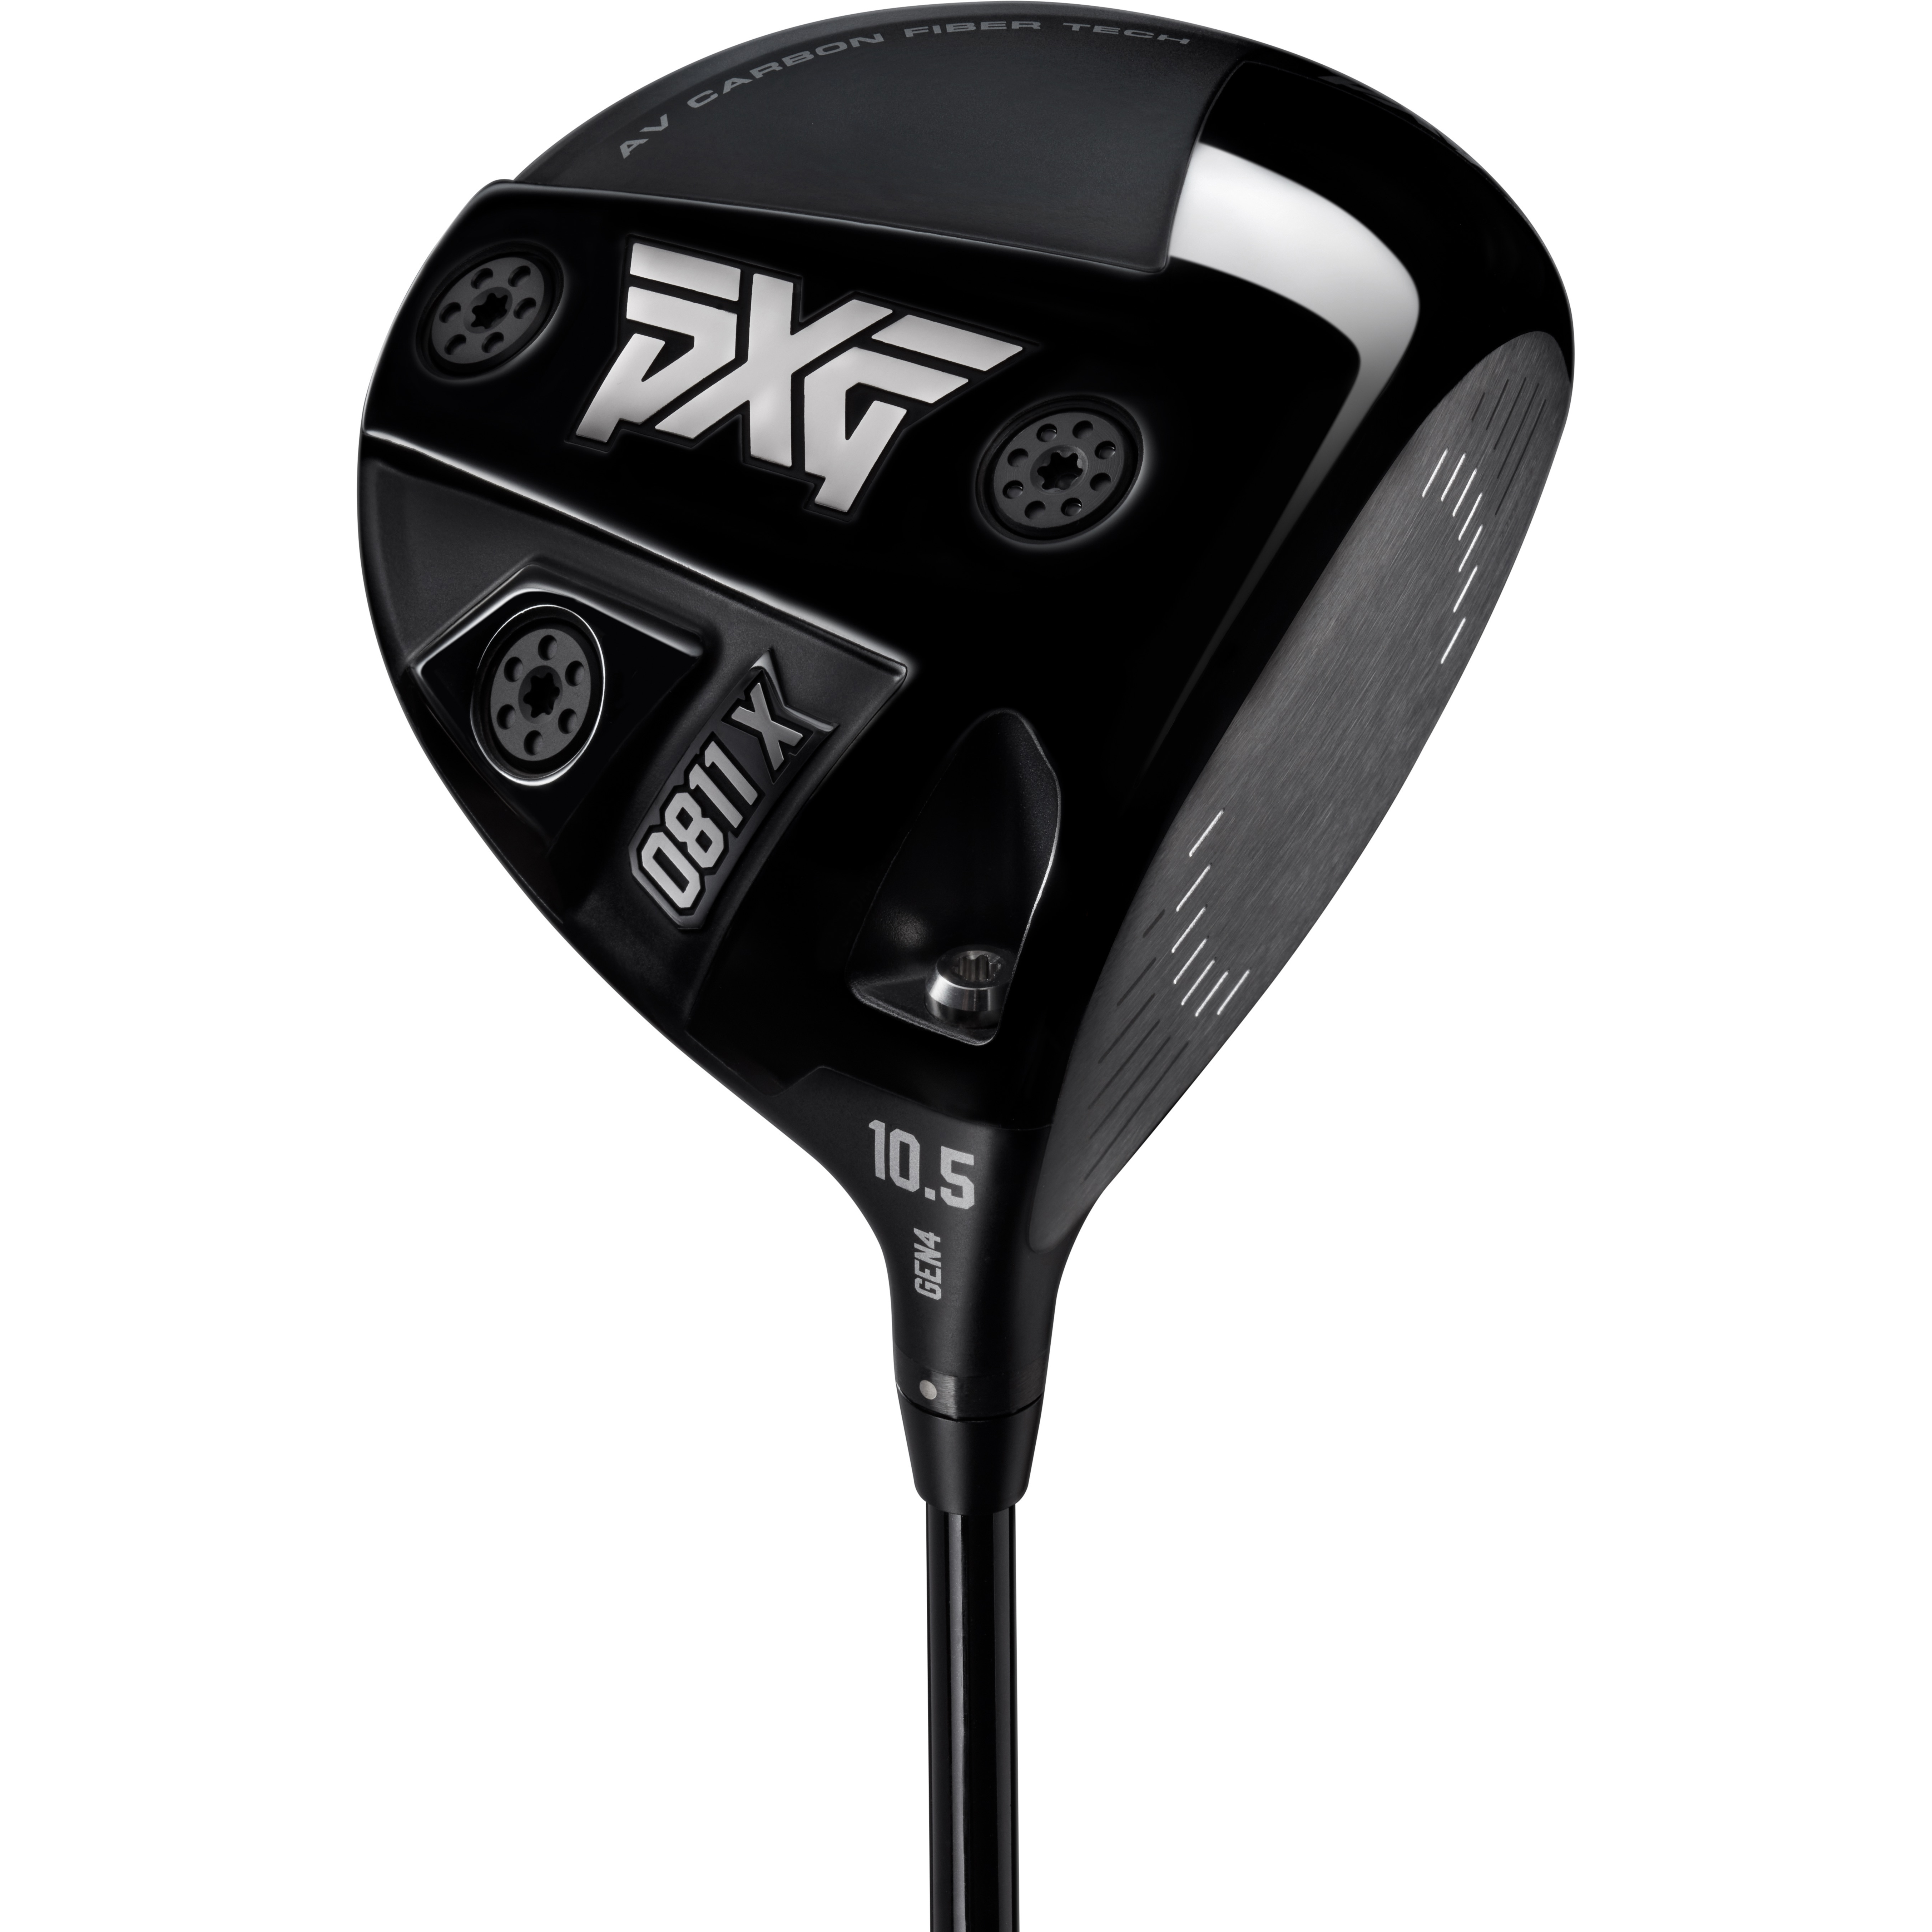 PXG's new GEN4 drivers, woods feature a whole new look in